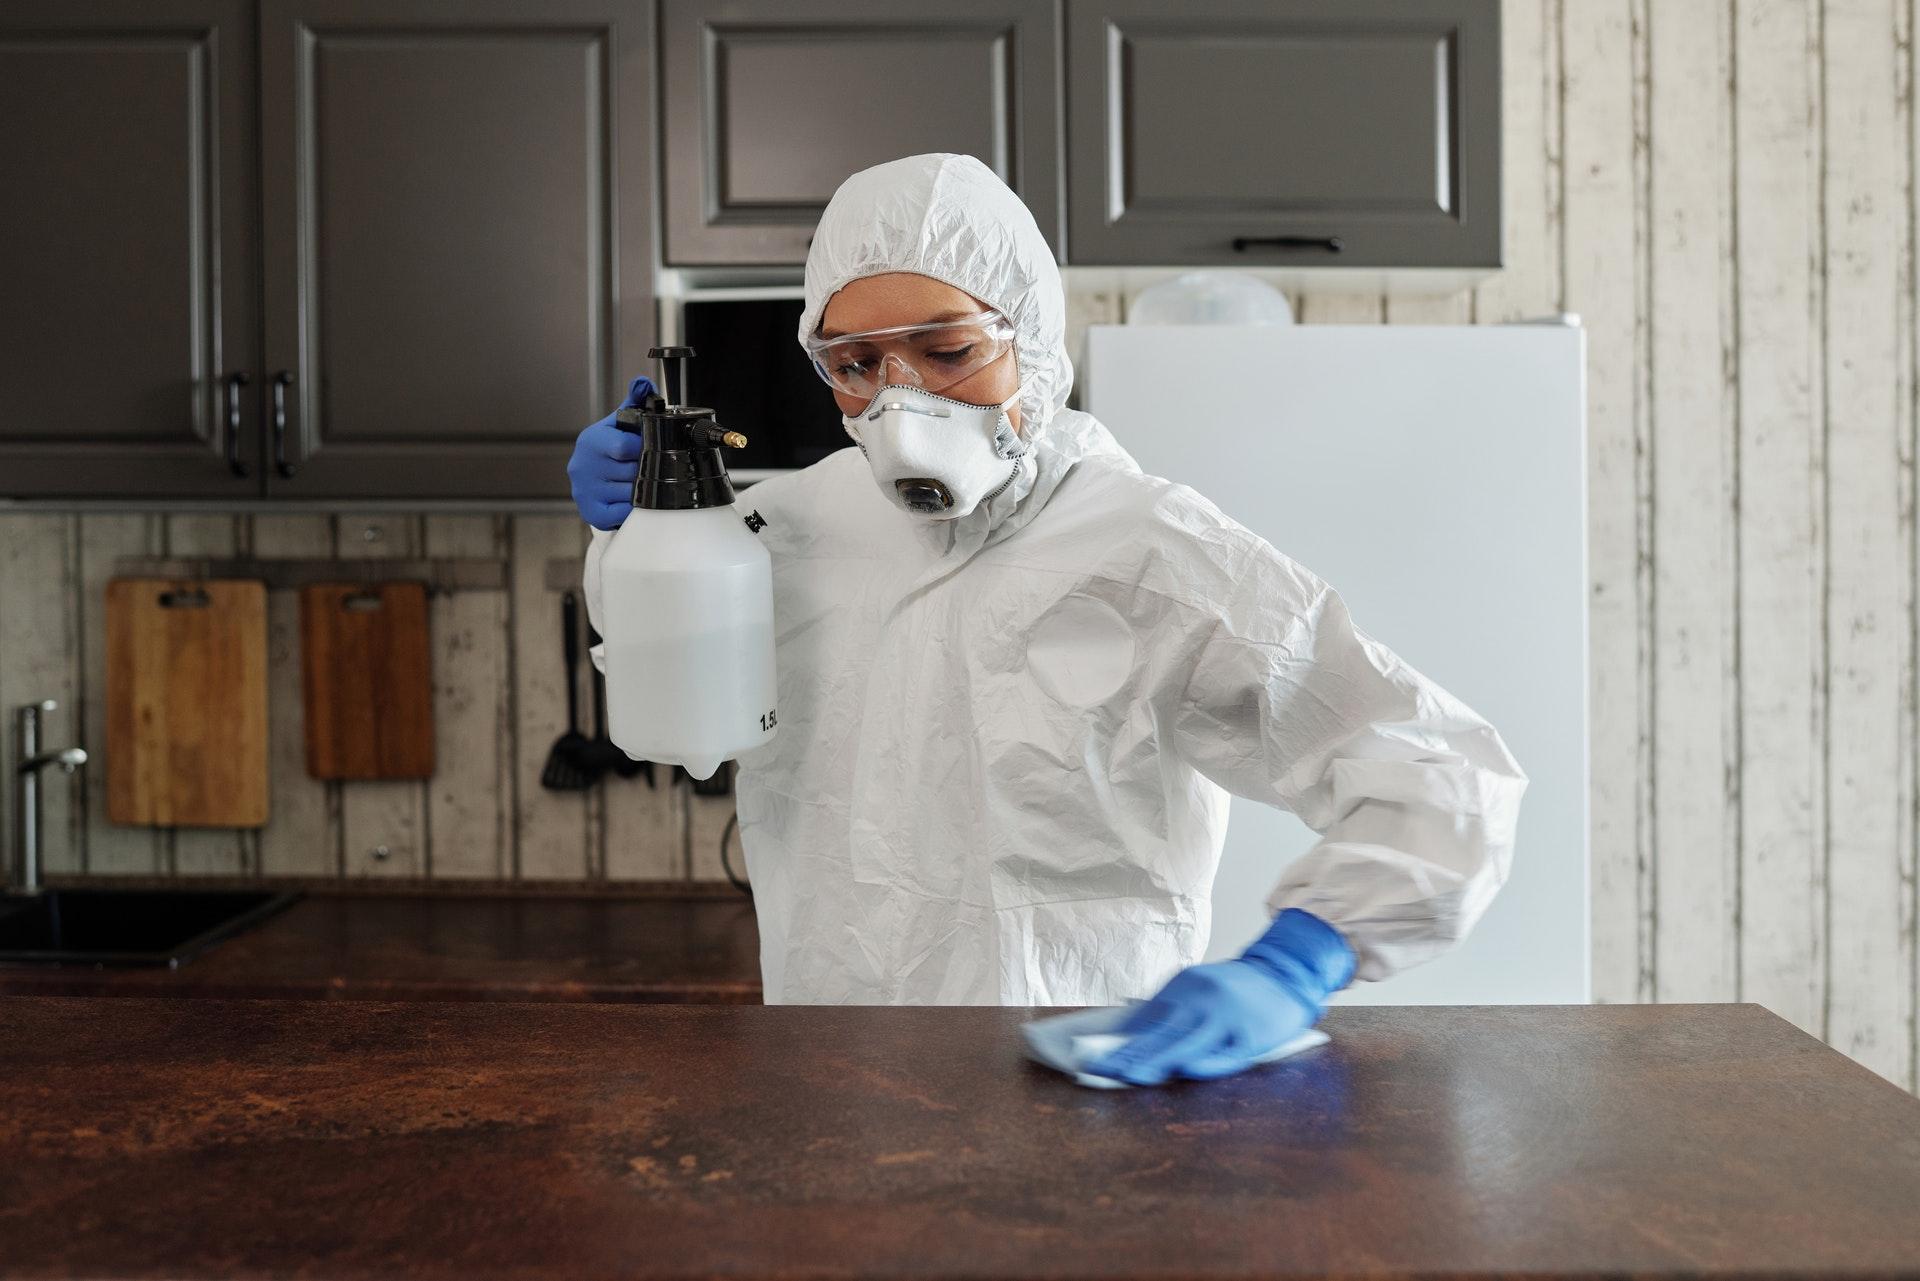 photo of person disinfecting table with liquid chemical.jpg